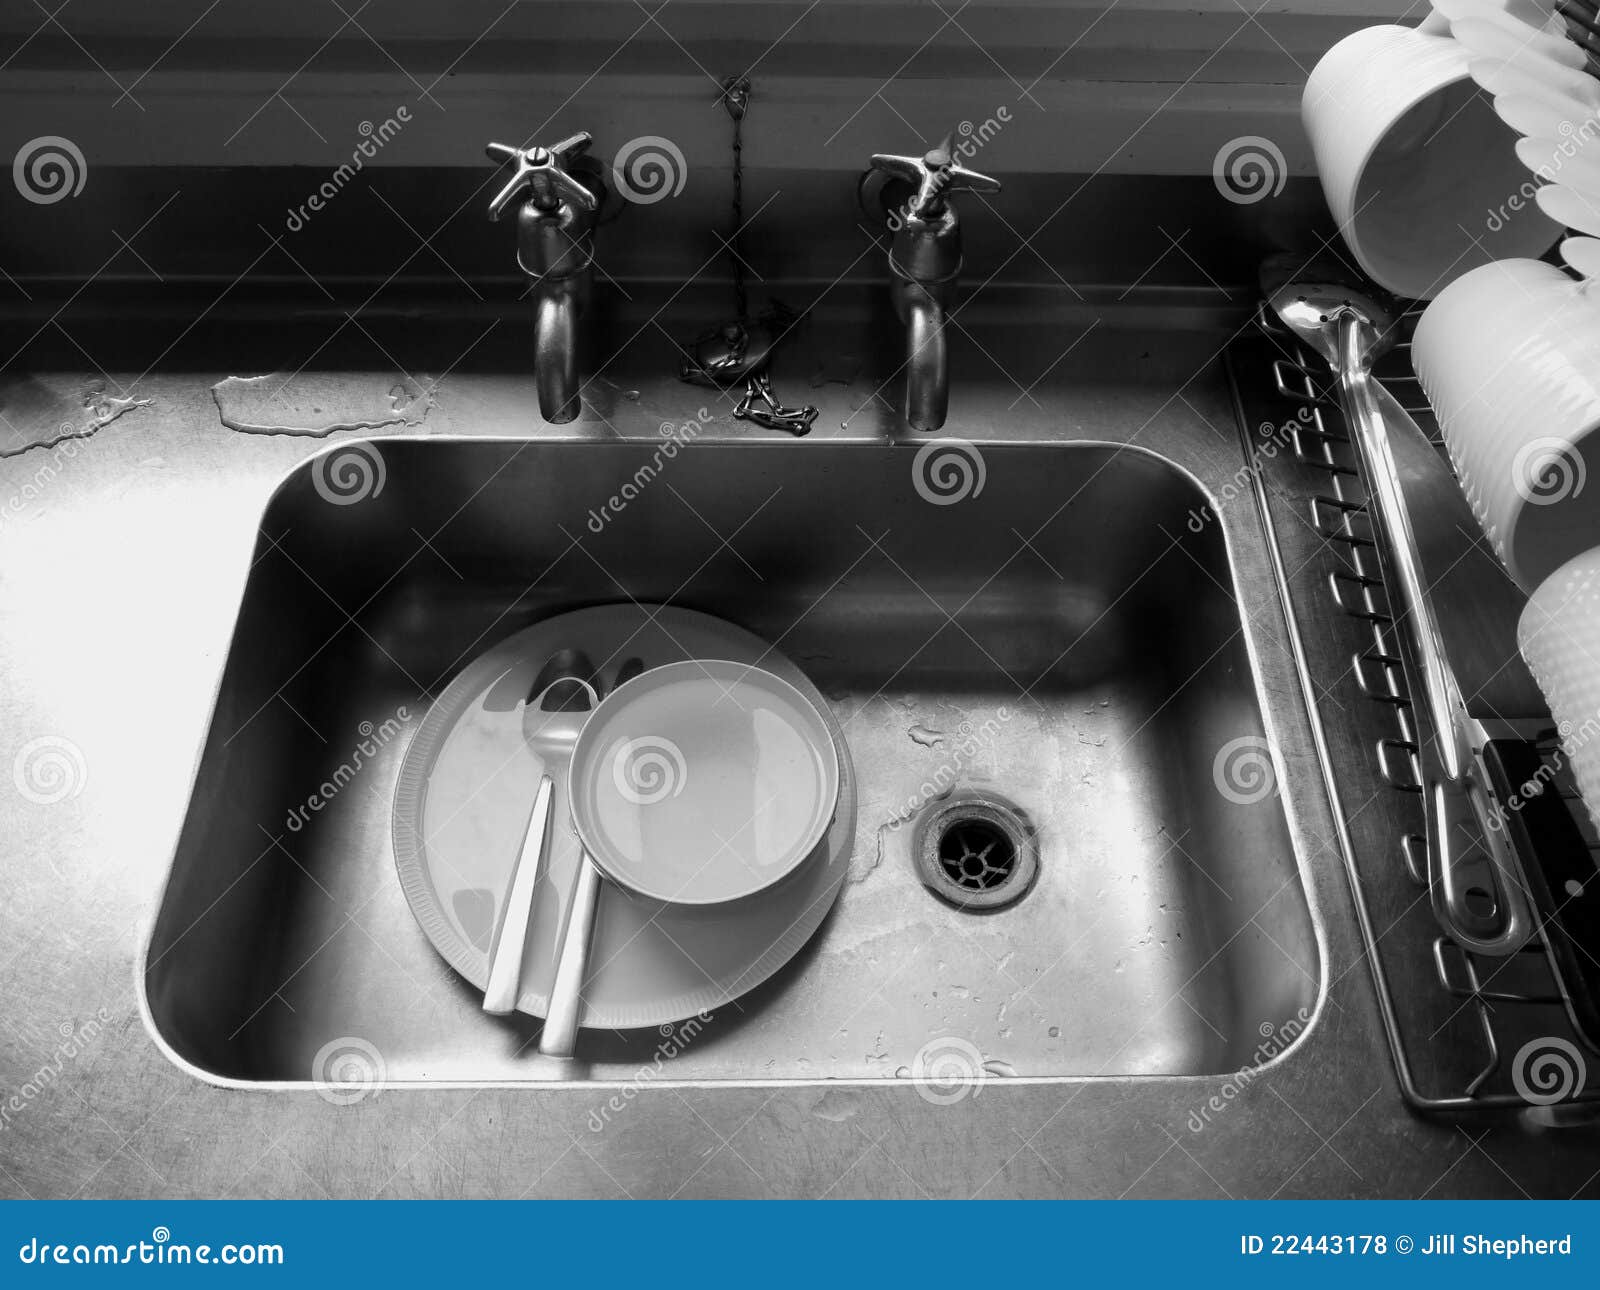 home: dirty dishes in sink